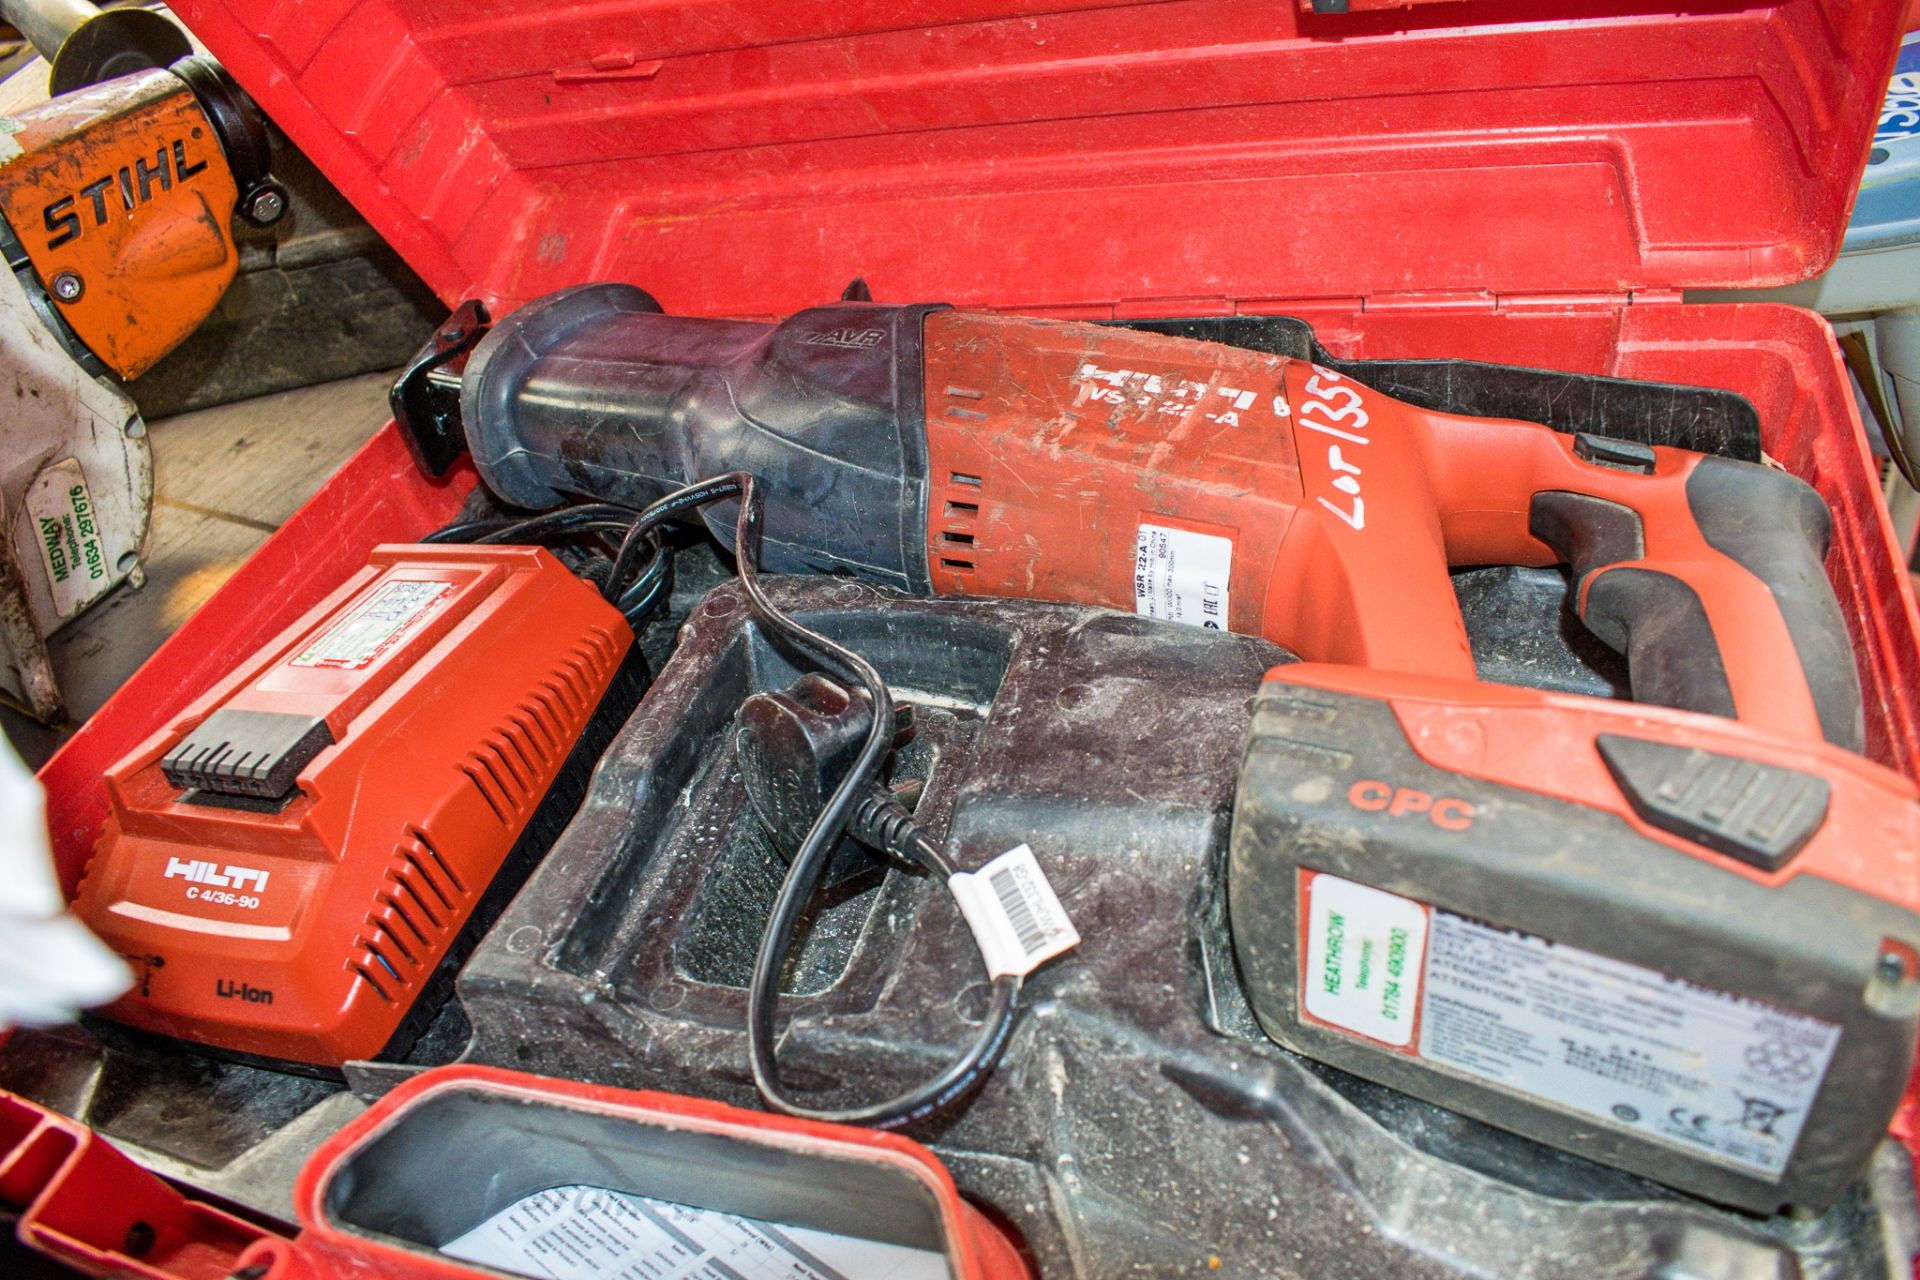 Hilti 22v cordless reciprocating saw c/w charger, battery and carry case A659047